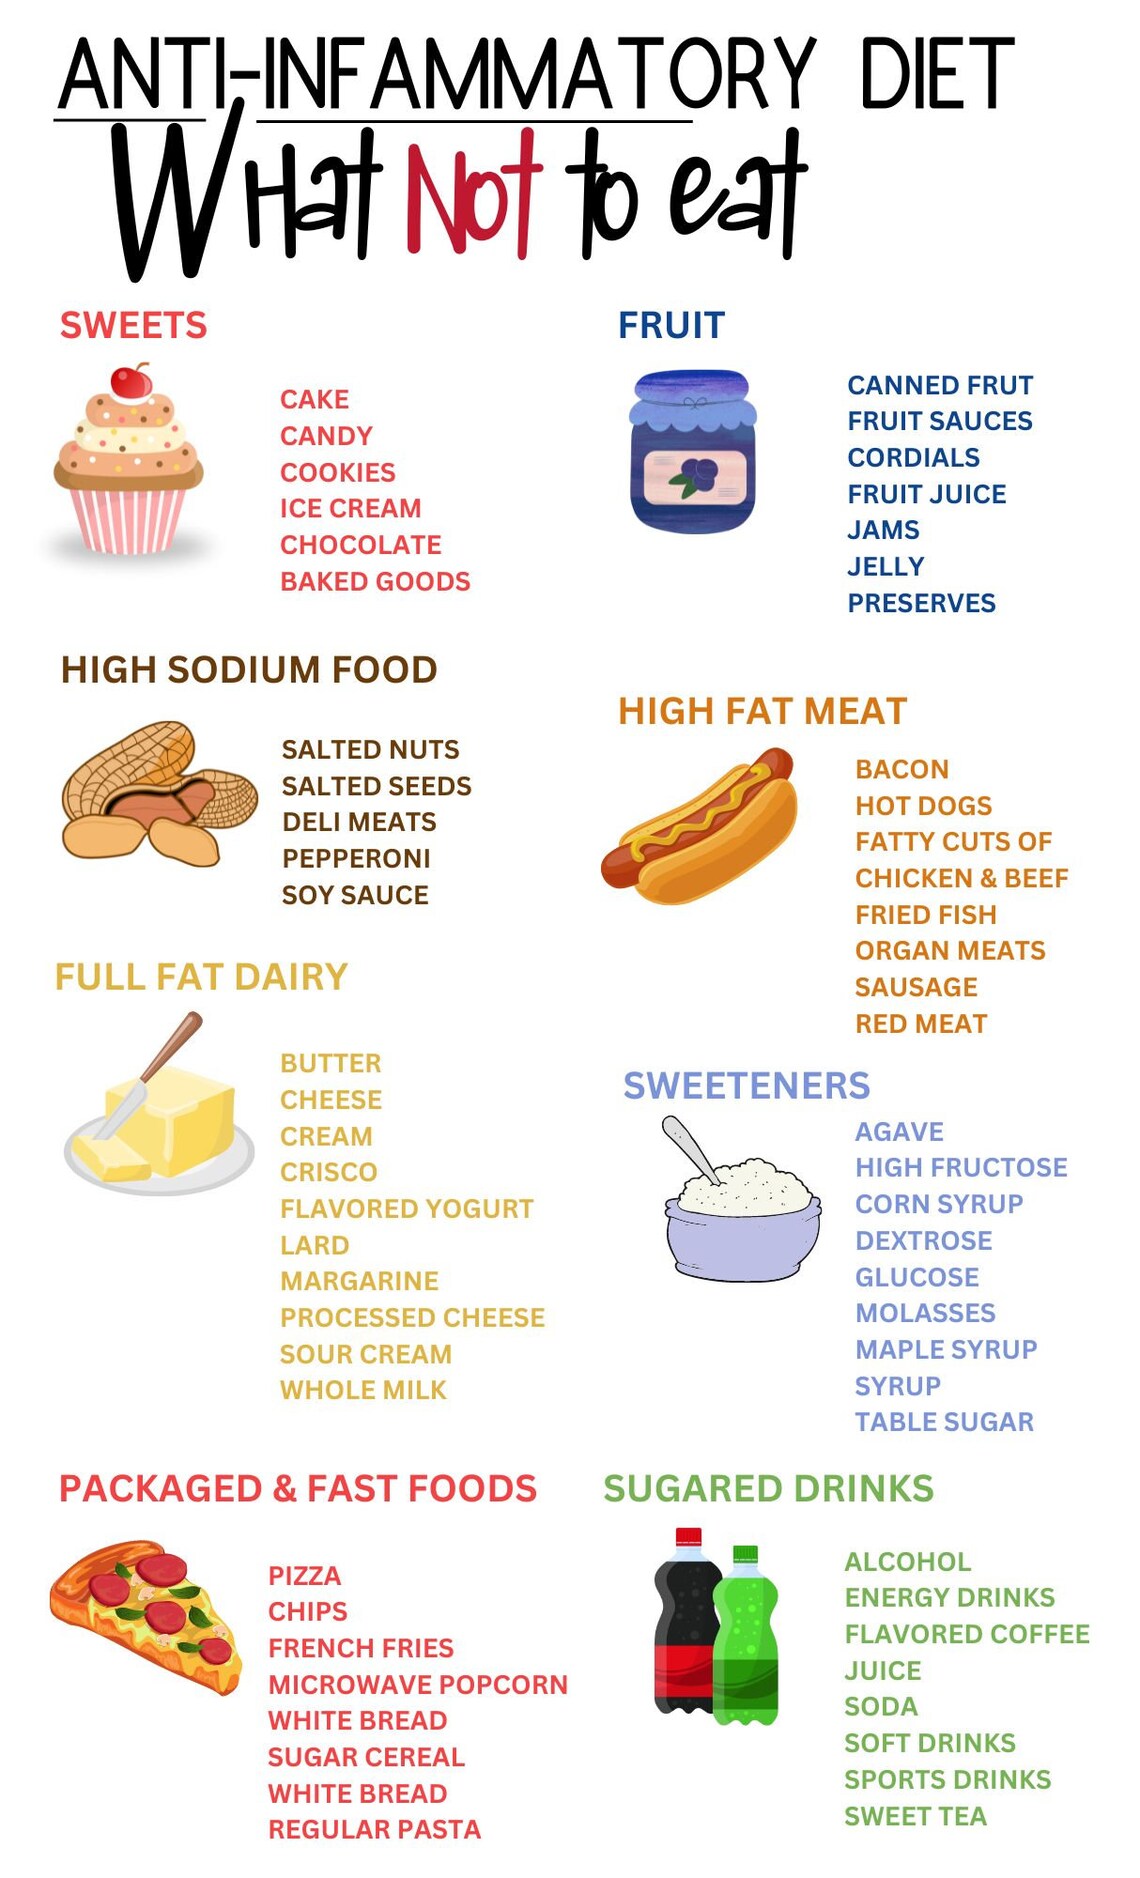 Anti-inflammatory and Arthritis Food List and Diet Guide, Patient ...